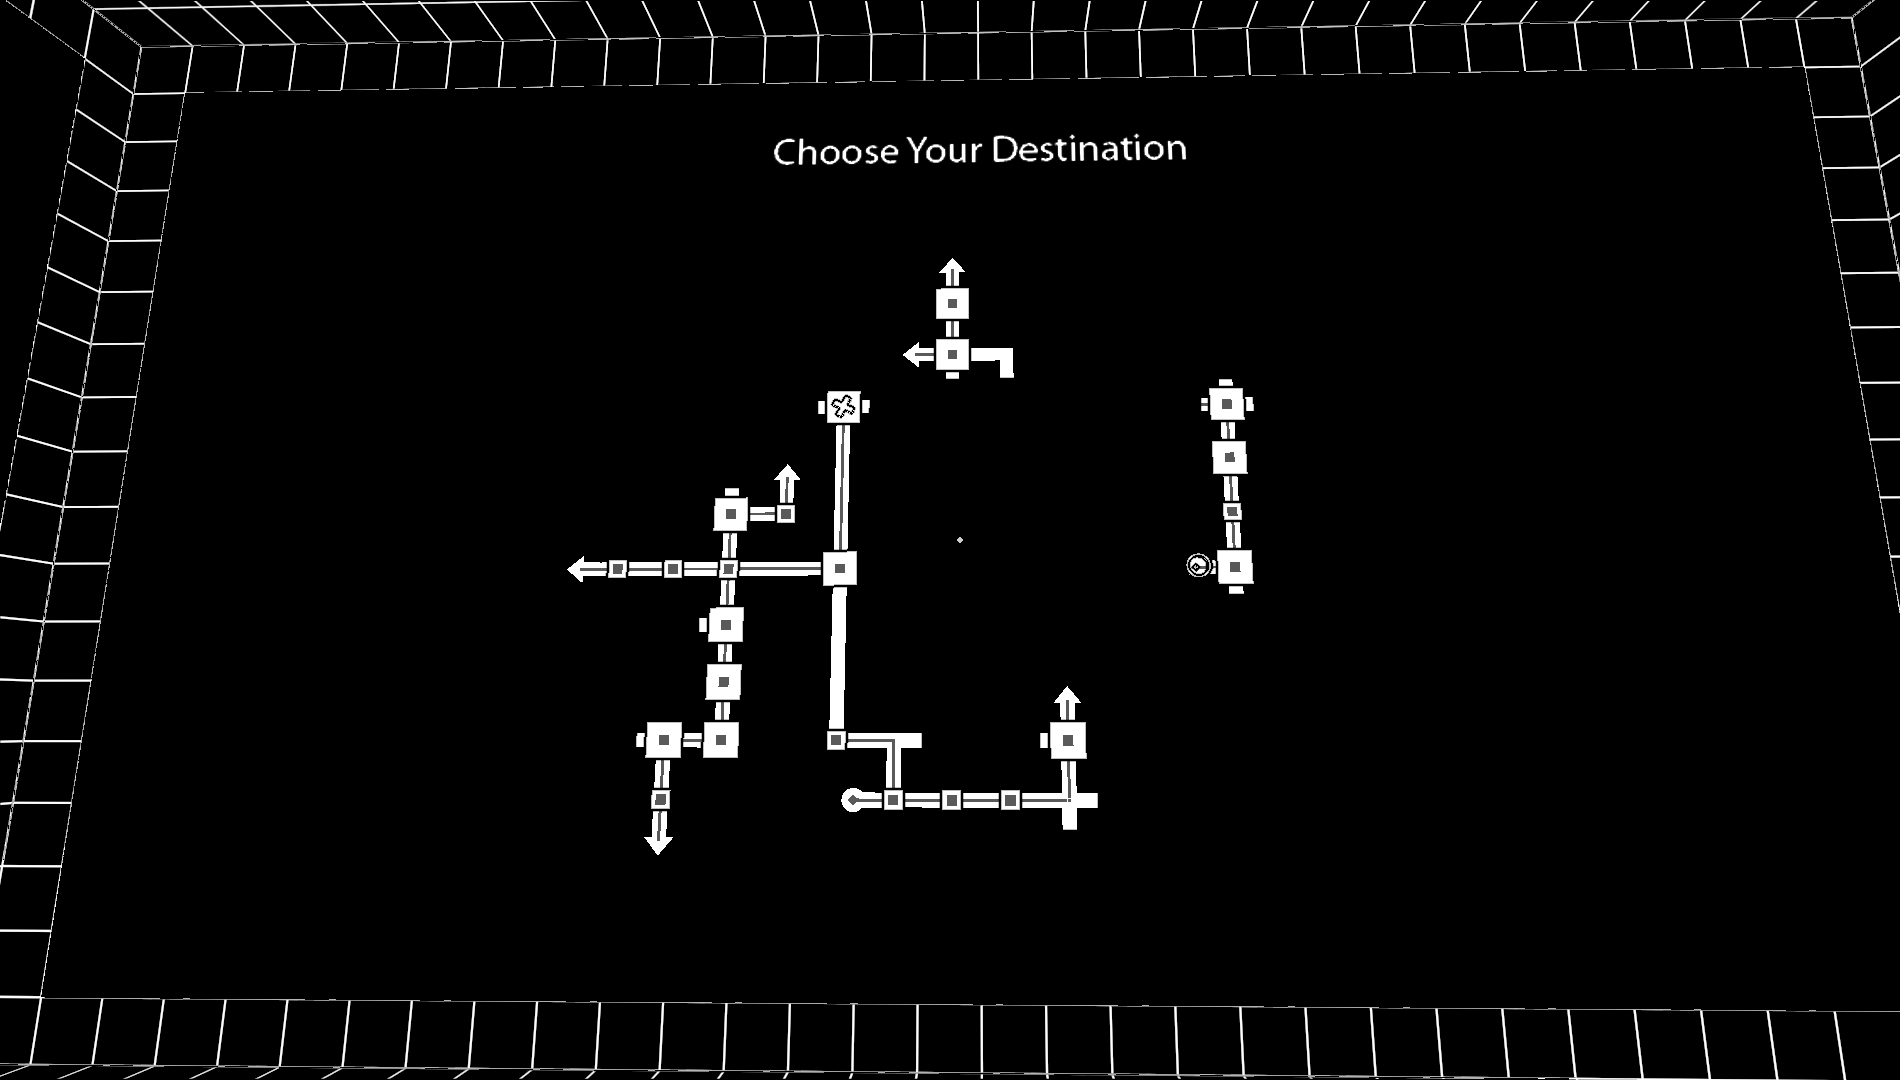 A black and white line map, somewhat disconnected, showing where the player has already been in the game